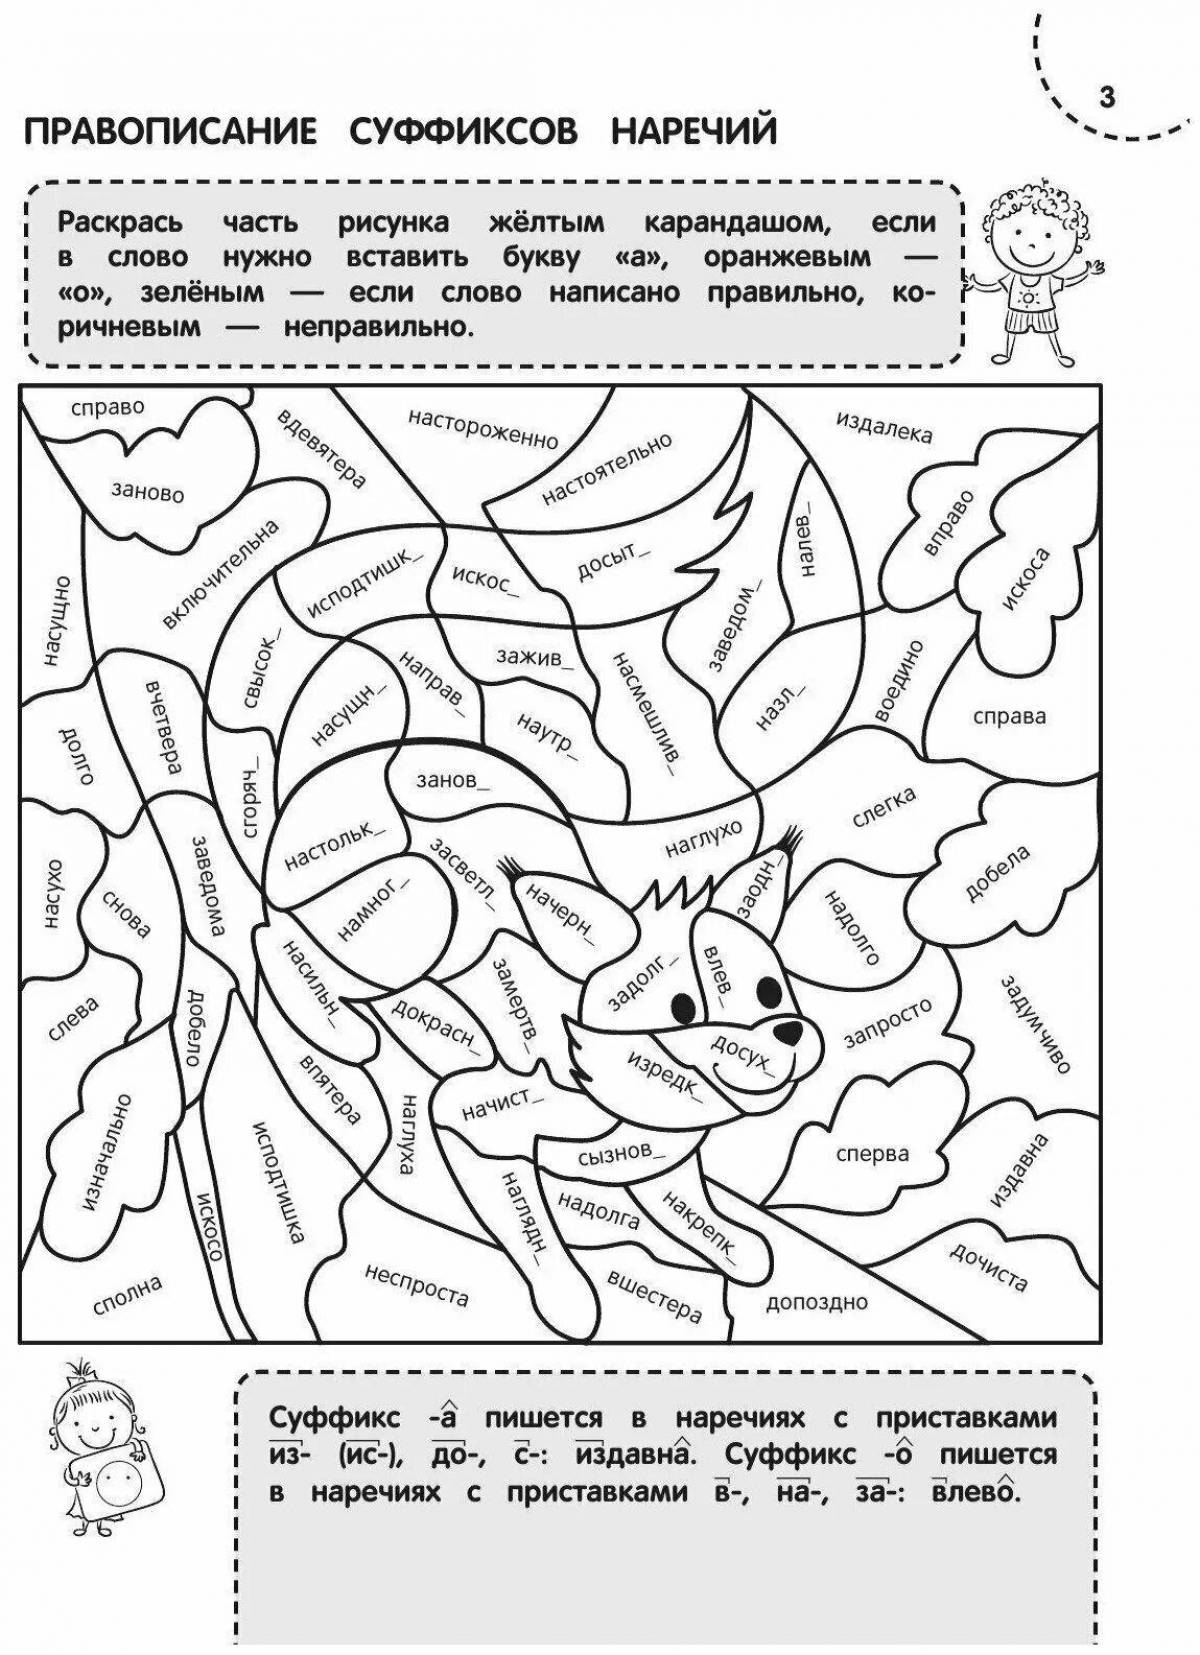 A fascinating coloring book in Russian Grade 3 with assignments